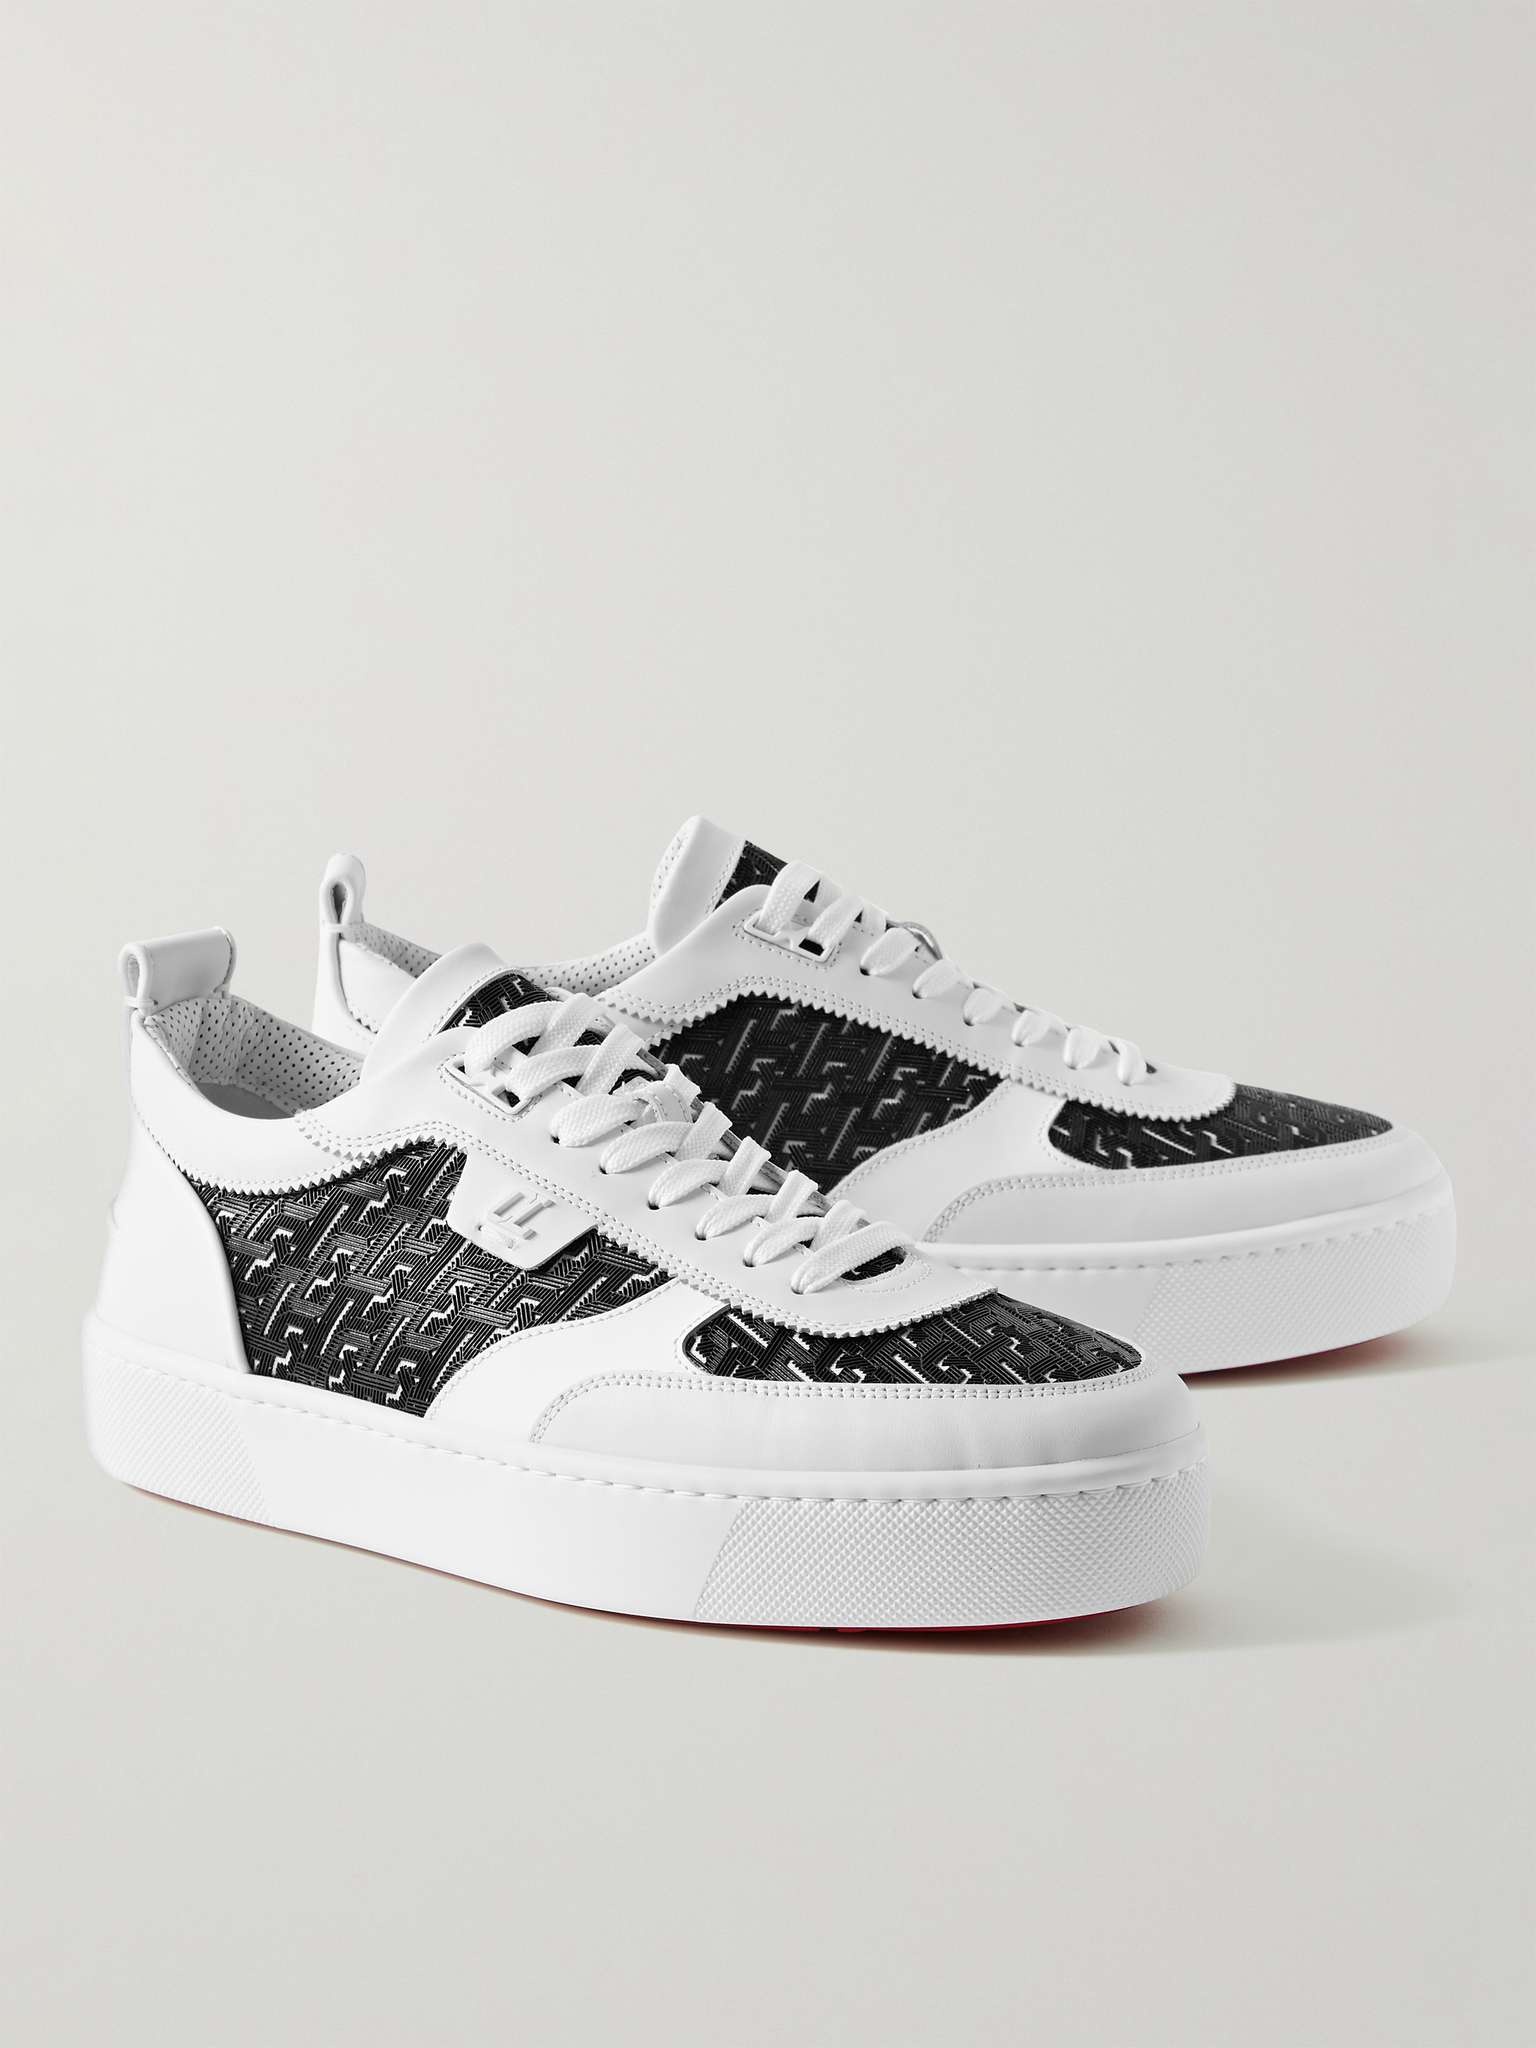 Happyrui Rubber-Trimmed Mesh and Leather Sneakers - 4